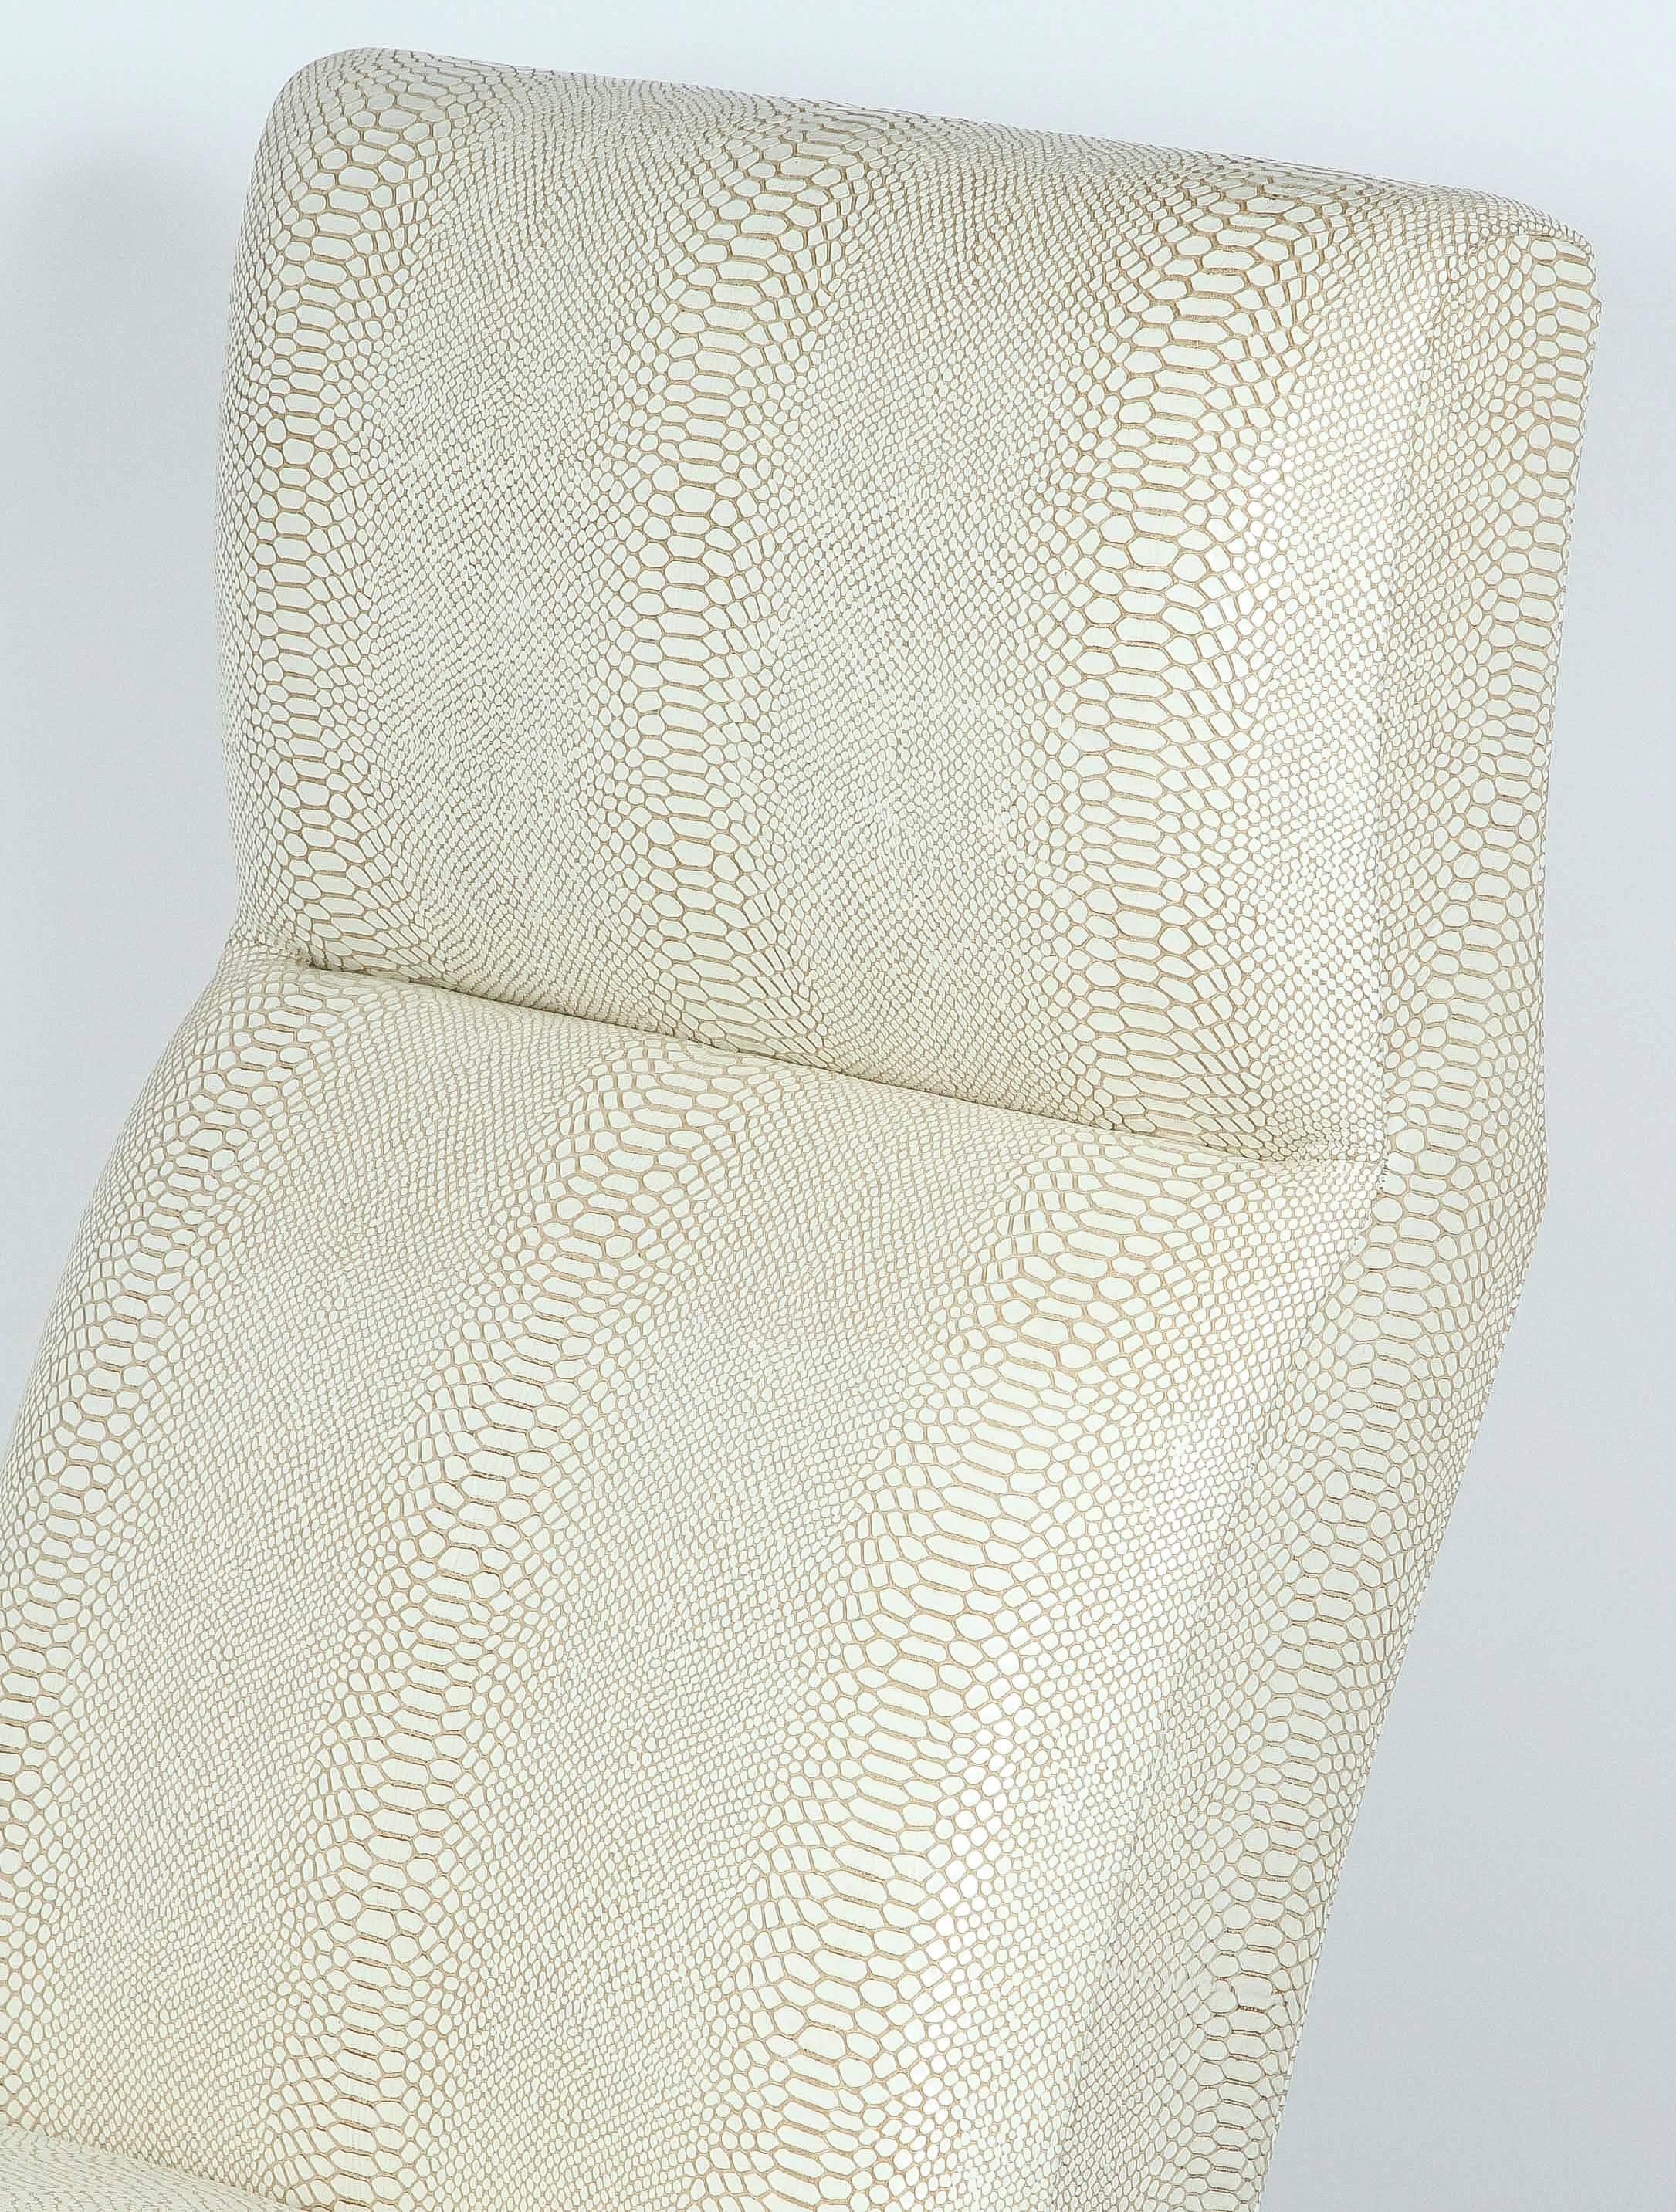 Paul Marra Slipper Chair in Brass with Faux Python For Sale 2